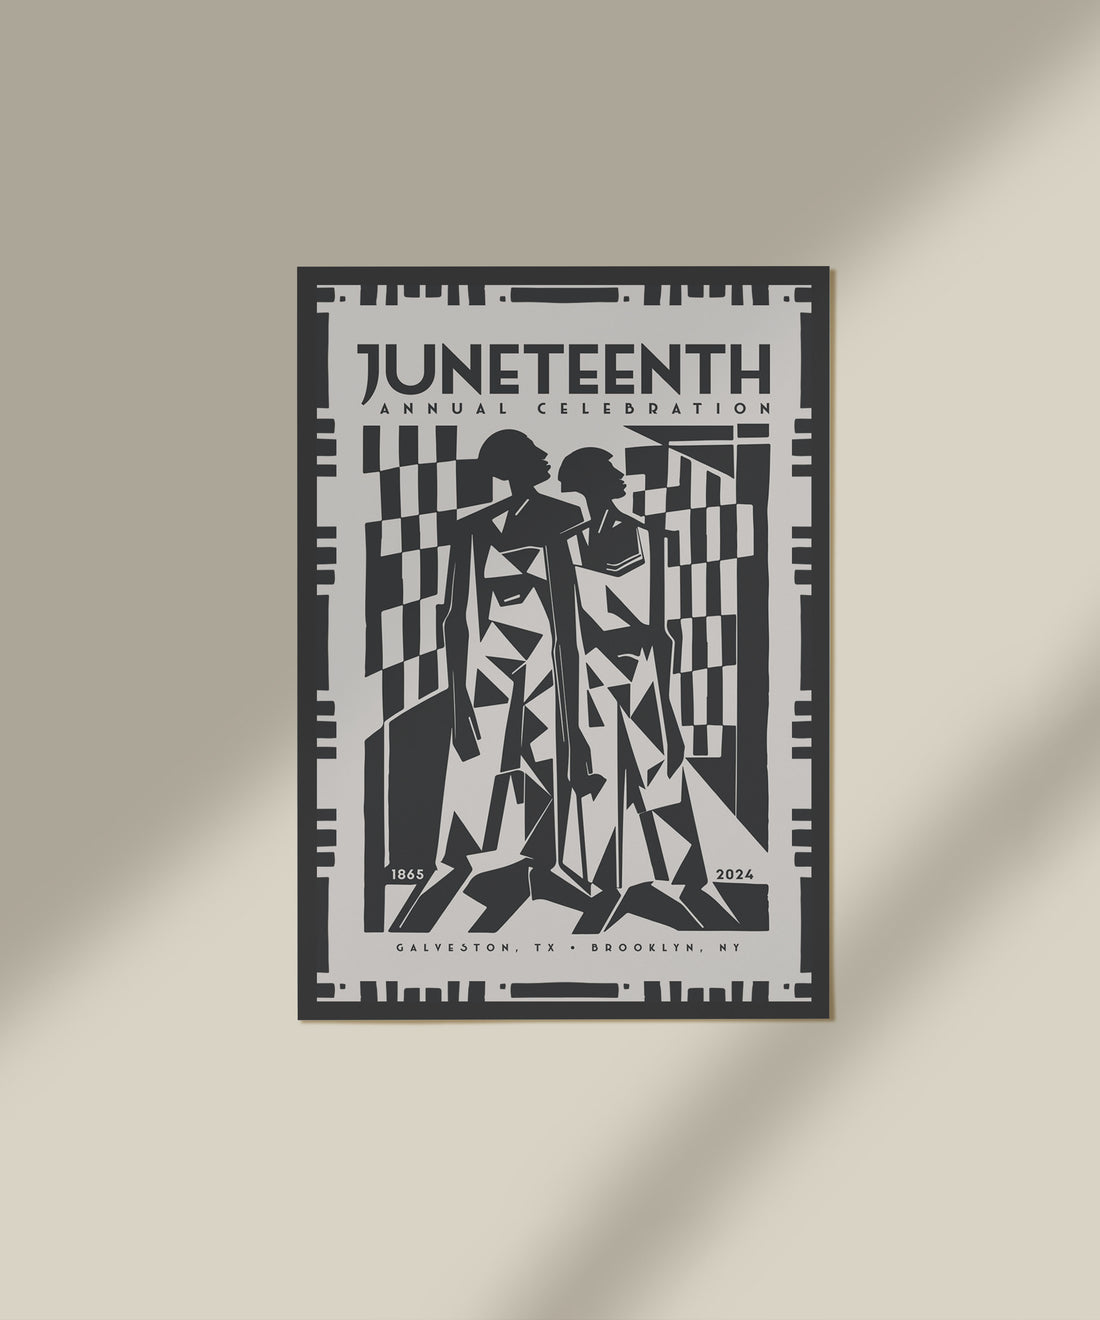 Juneteenth 2024 Annual Celebration Poster